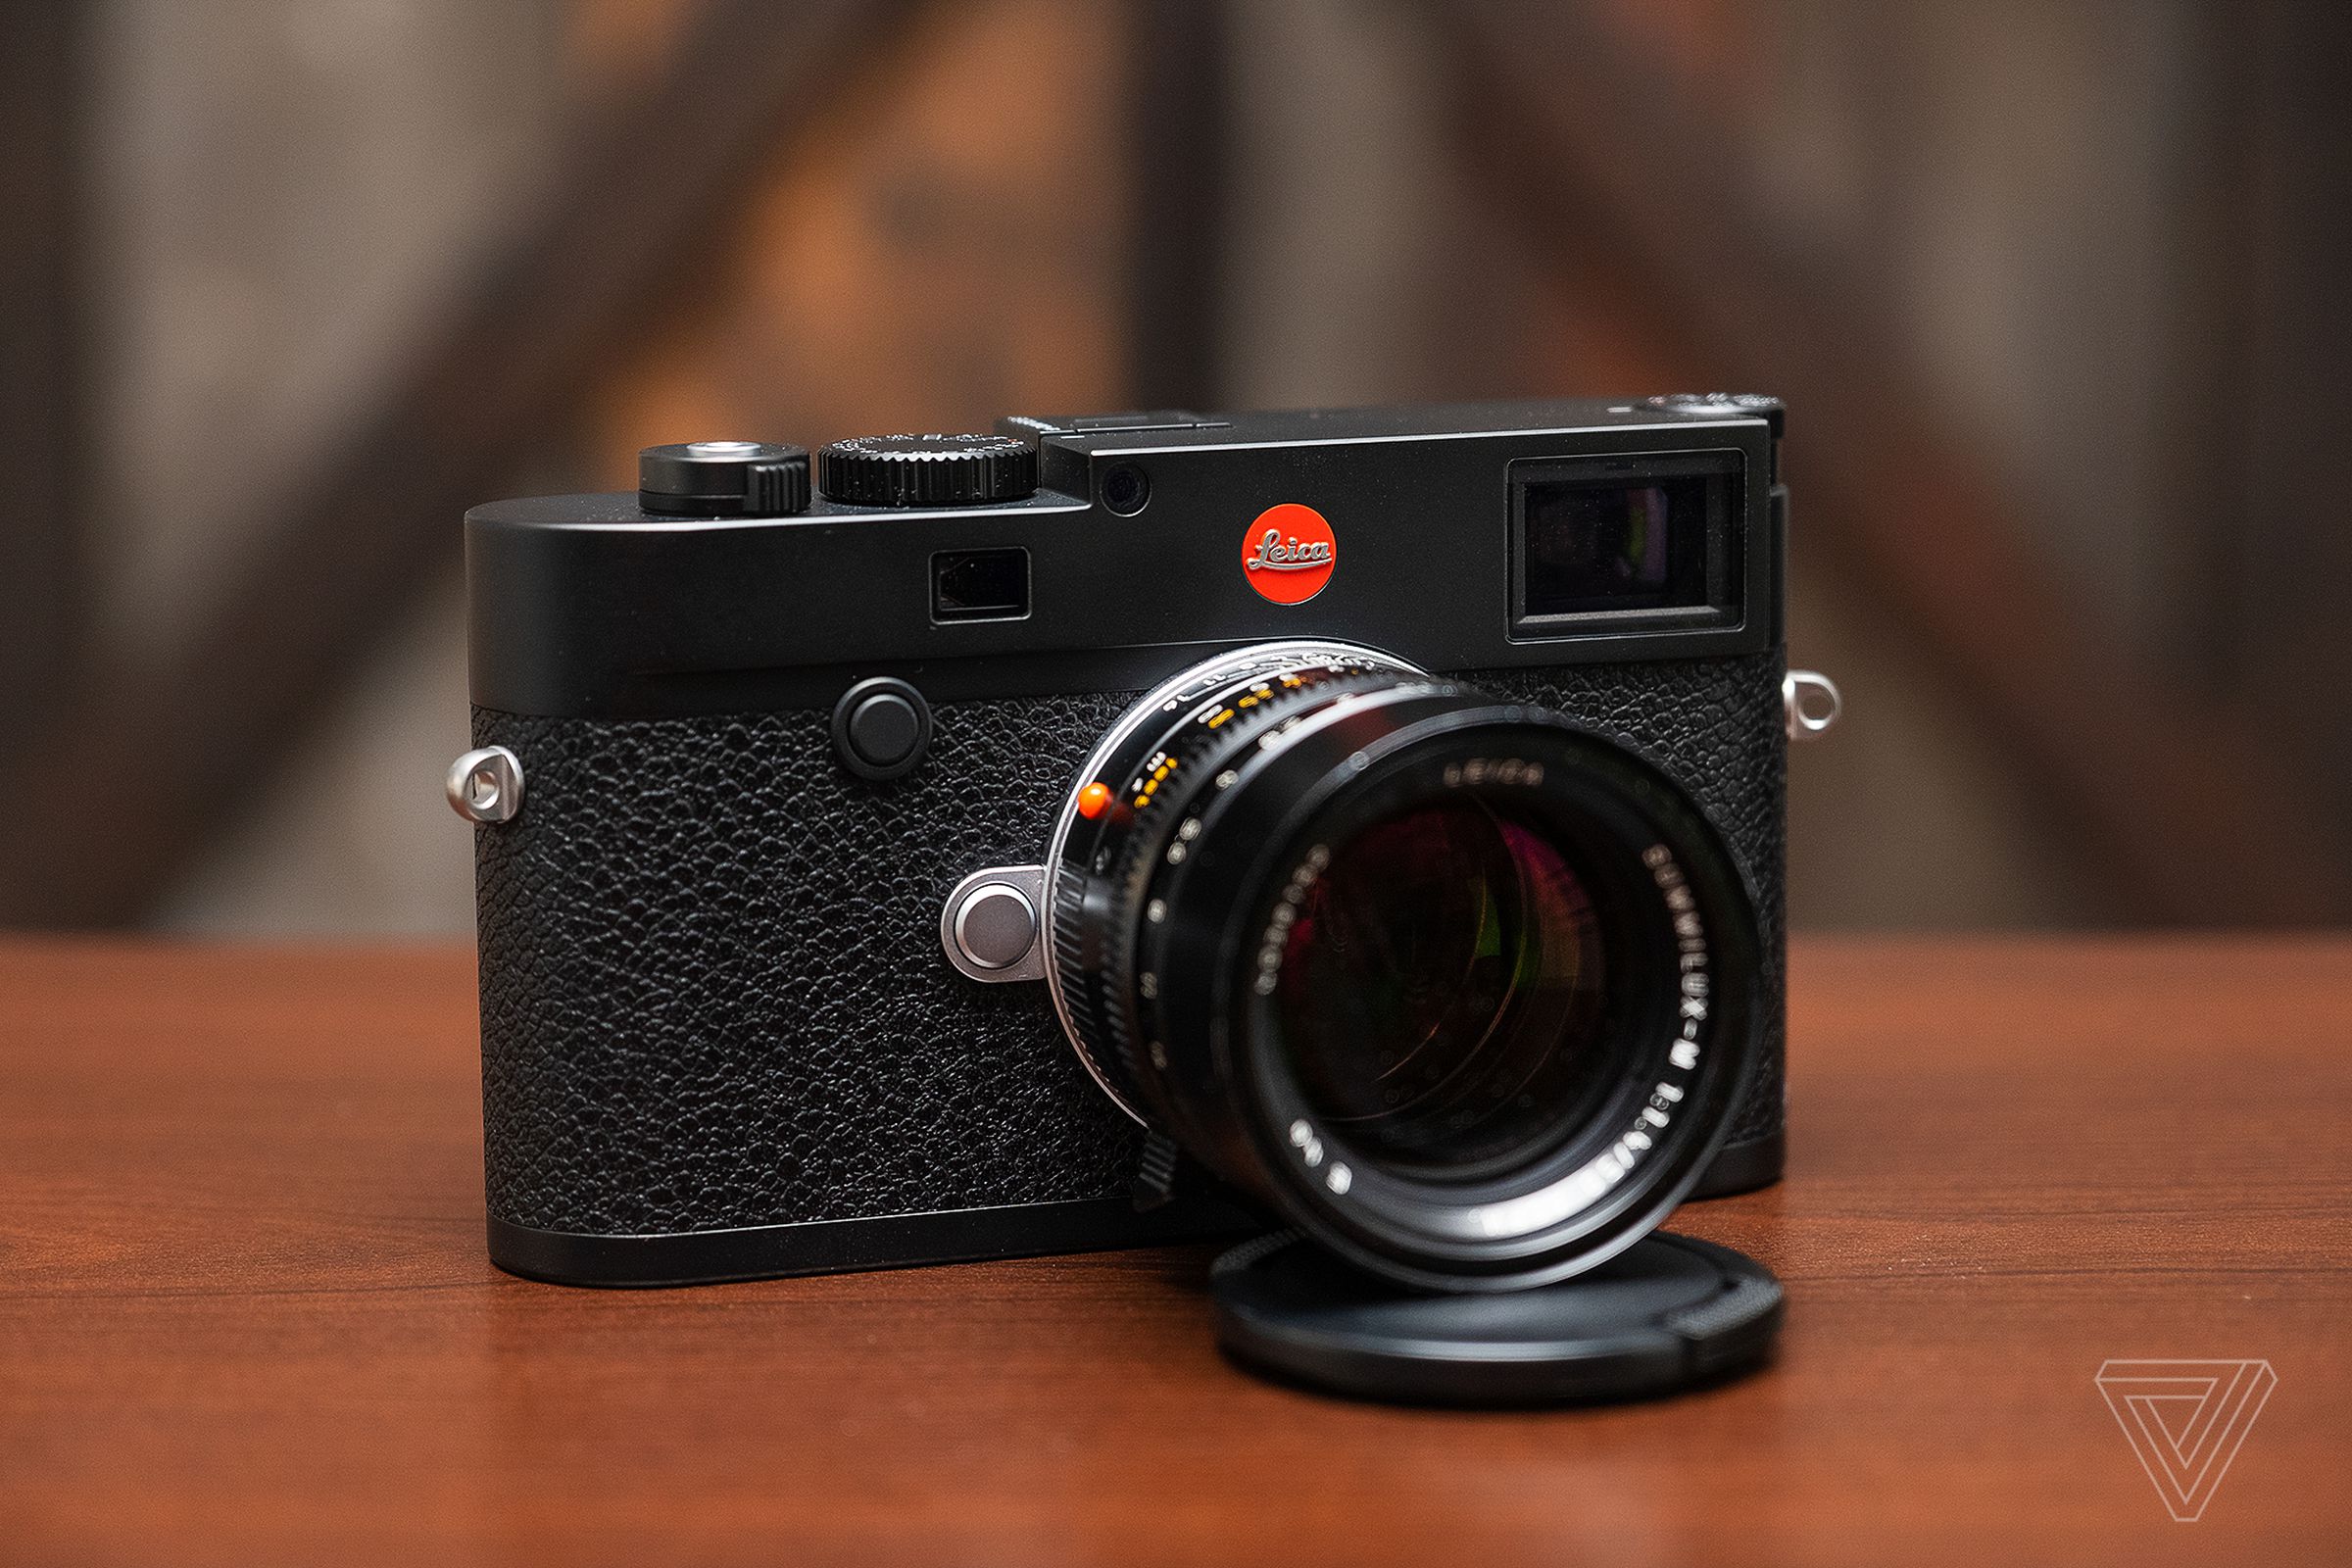 Leica M10-R with a 50mm 1.4 lens